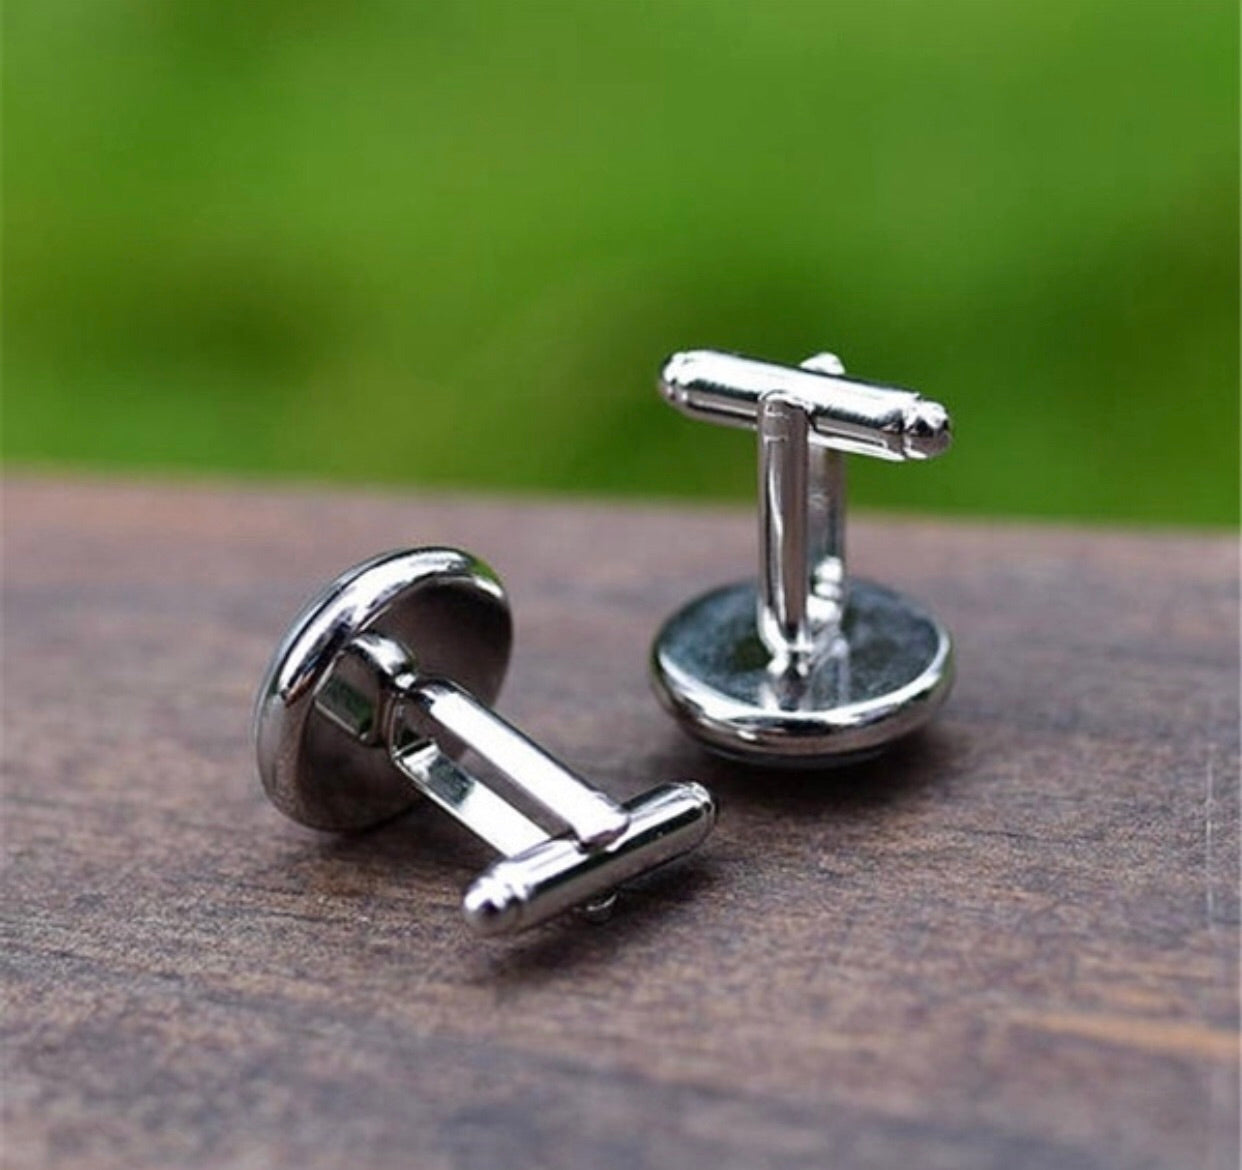 Game Controller Novelty Cuff Links